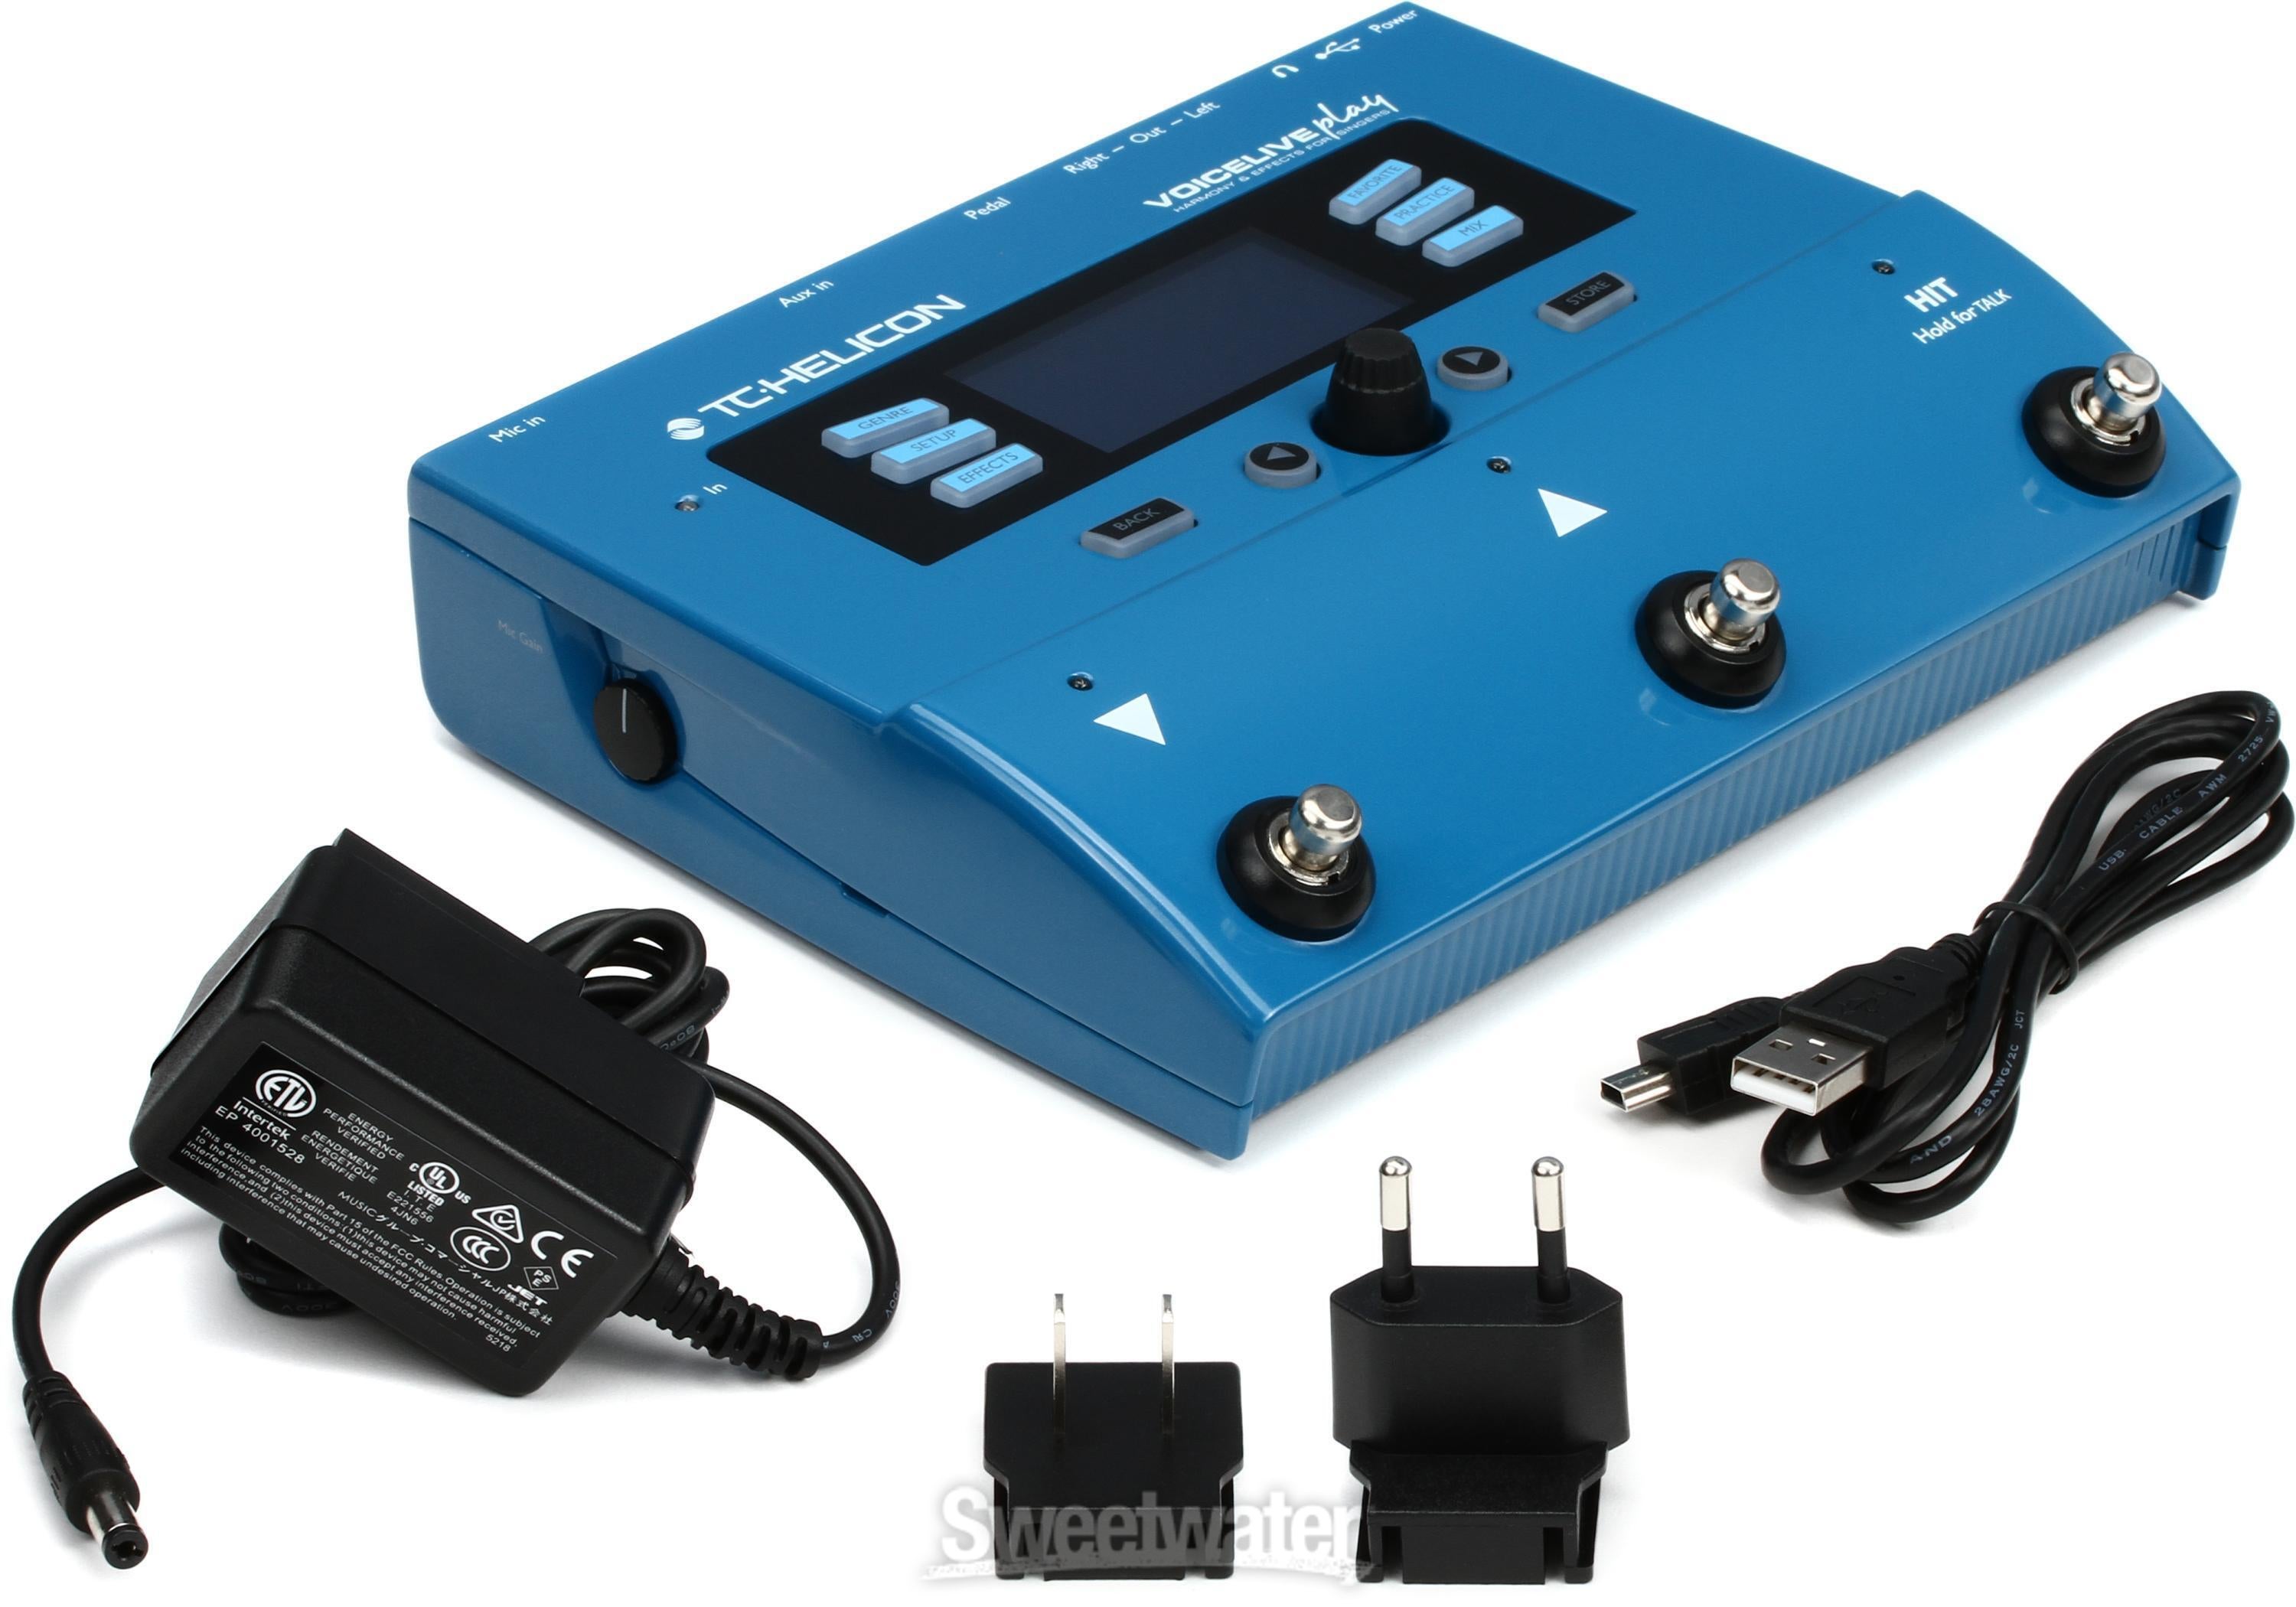 TC Helicon VoiceLive Play Vocal Harmony and Effects   Sweetwater